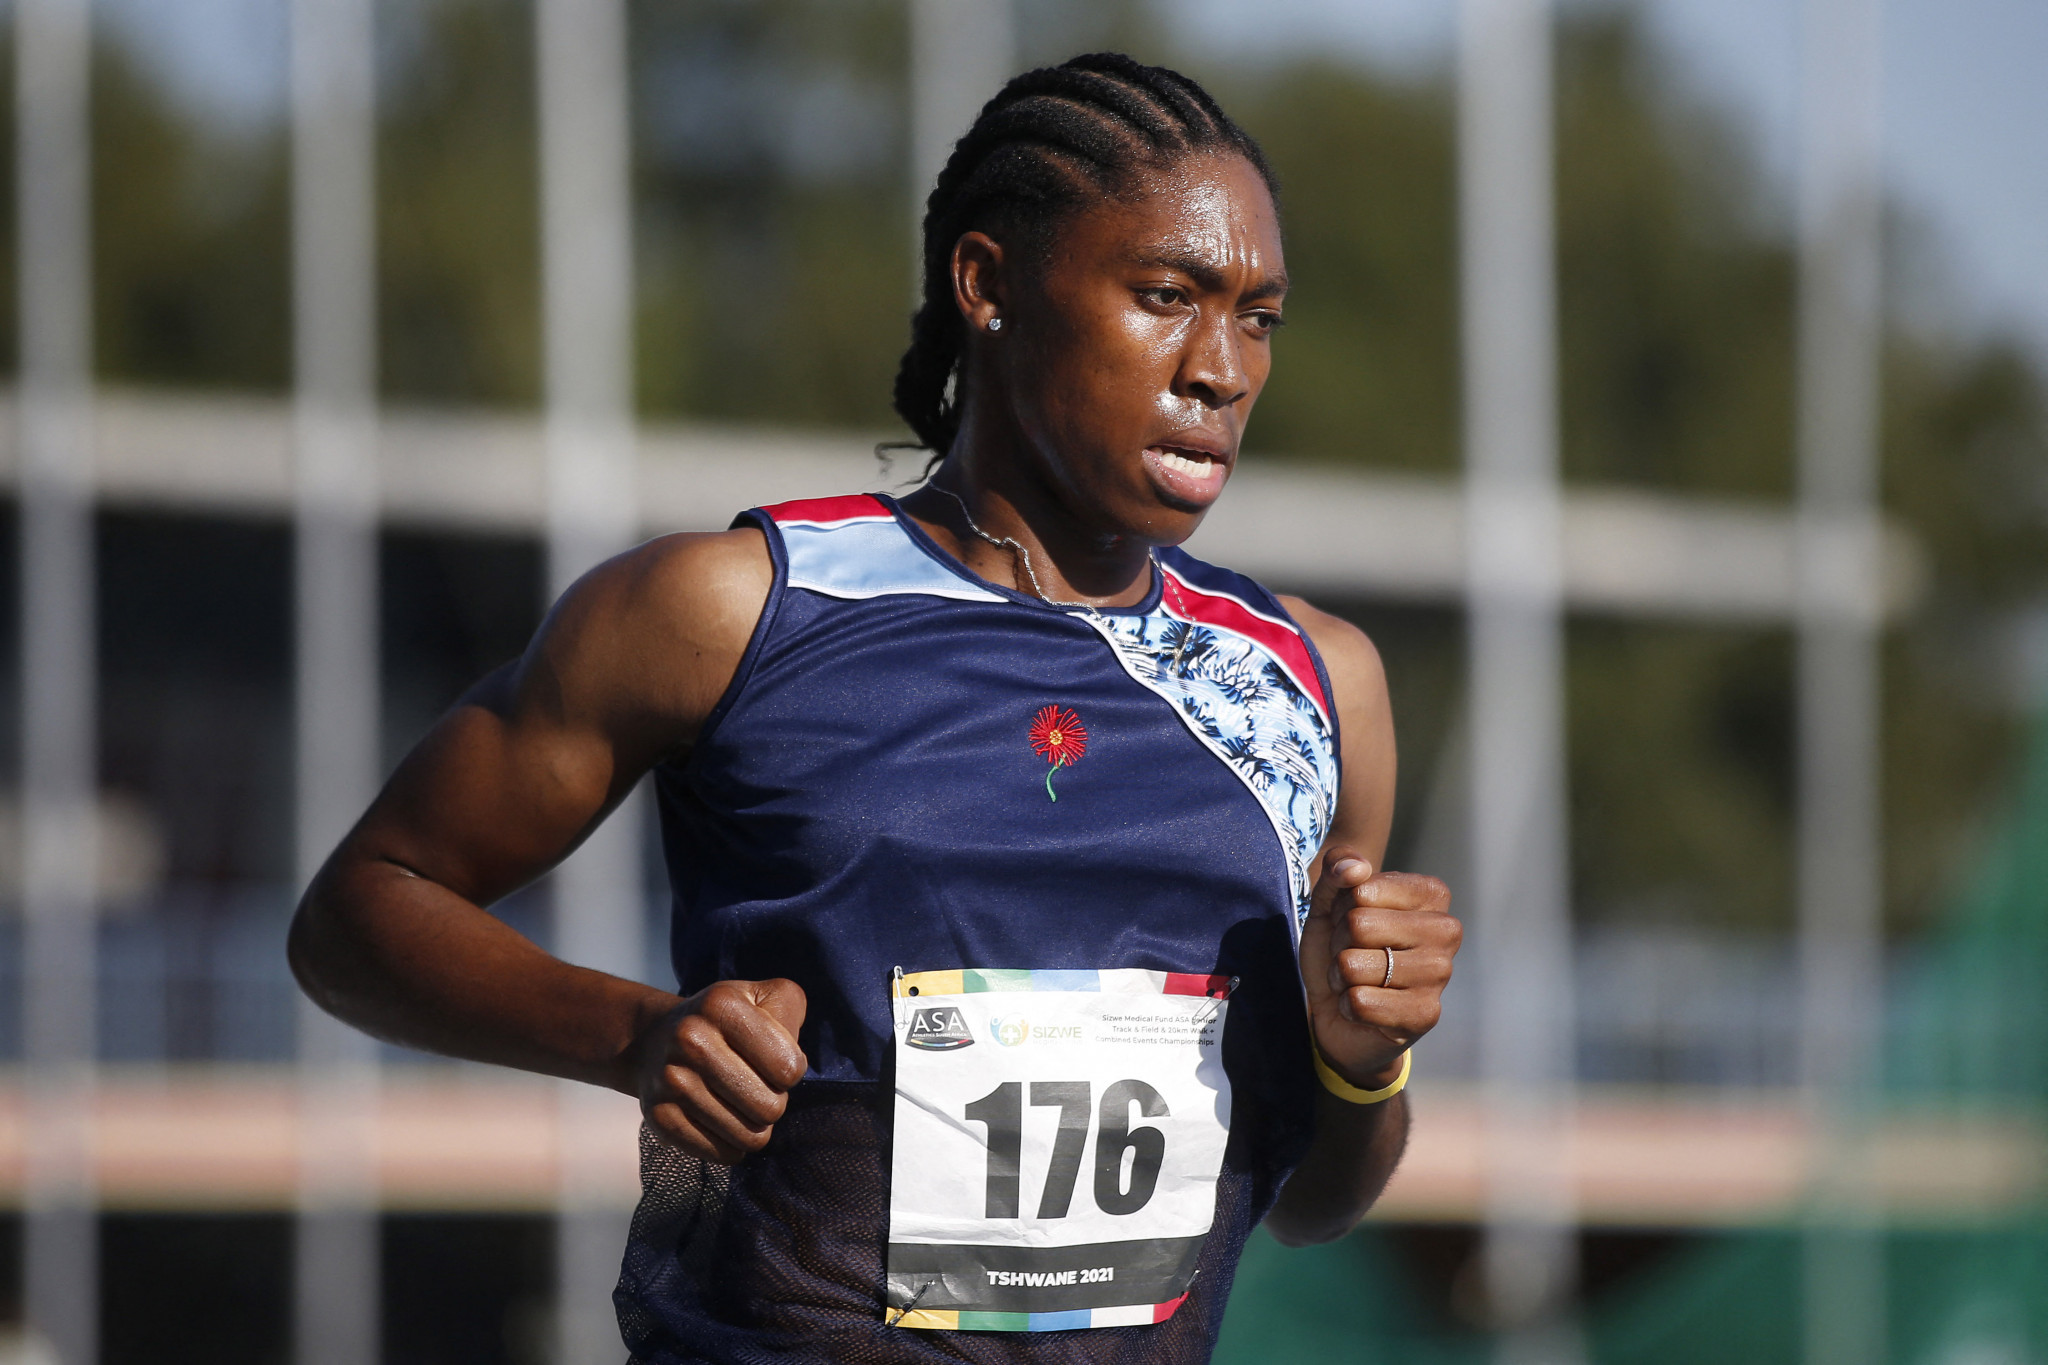 Semenya misses 5,000m qualification time for Tokyo 2020 in latest race in Durban